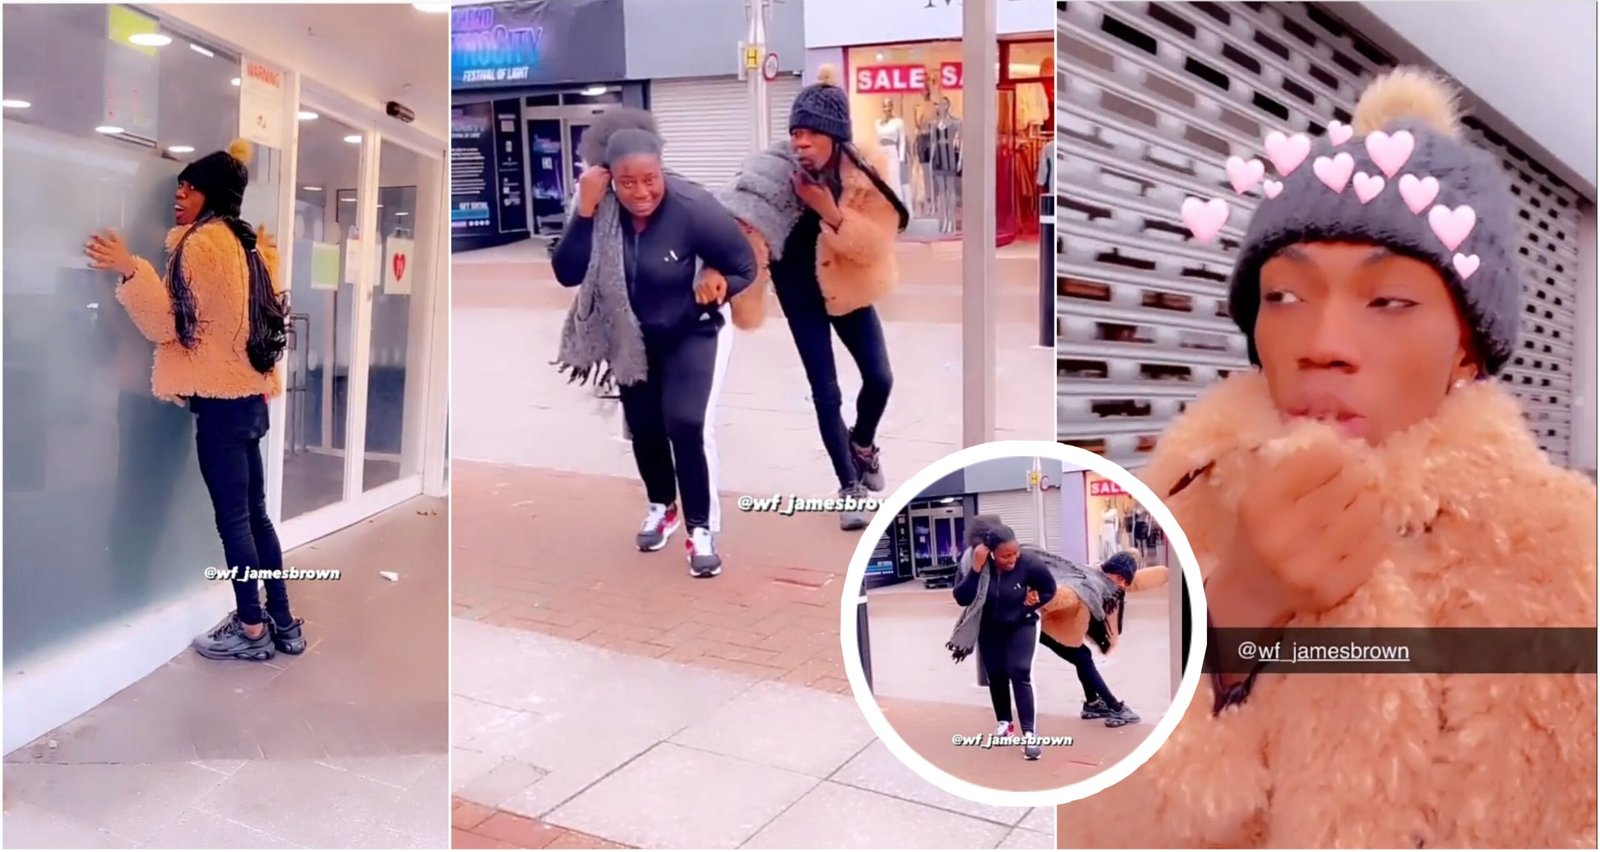 “UK is not easy o” – James Brown reacts after he almost got blown away by a fierce wind (VIDEO)